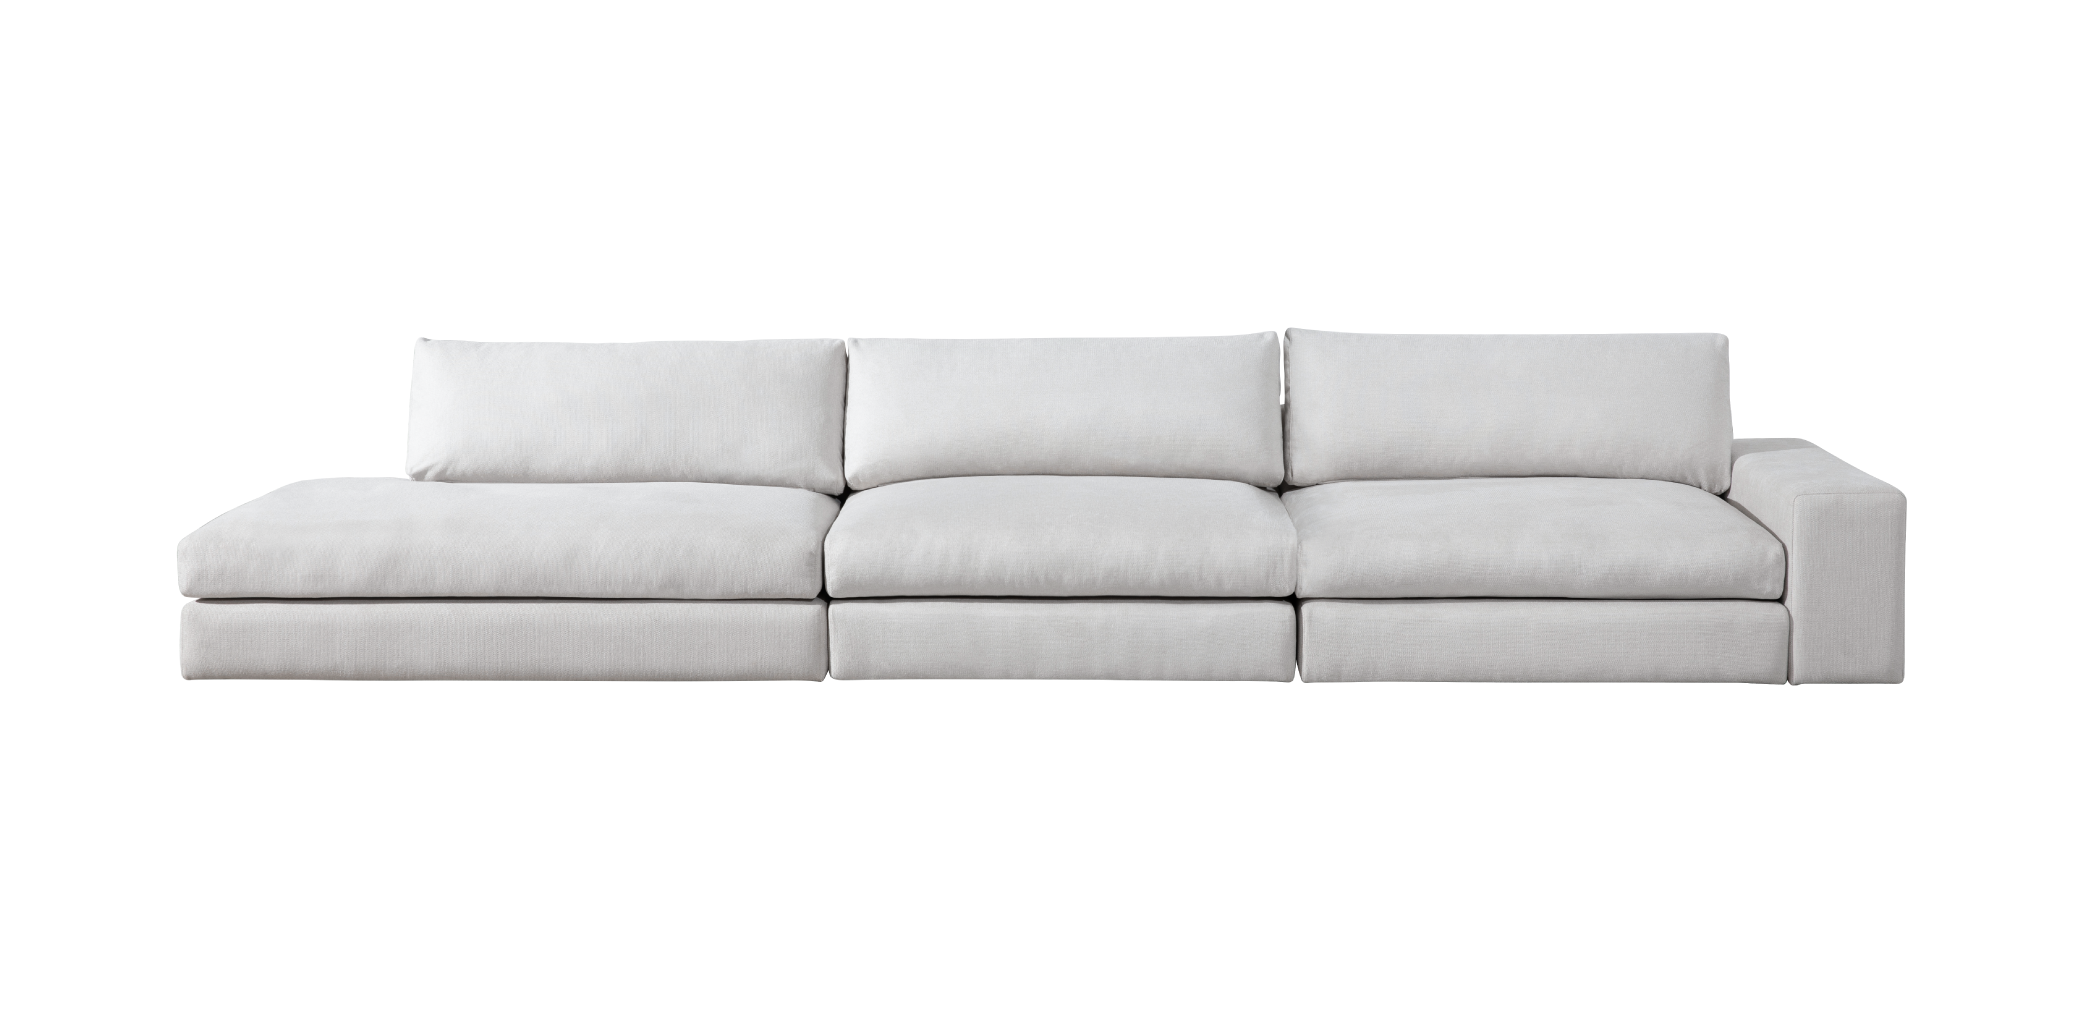 https://zerofurniture.vn/static/2974/2023/12/11/product_classic_3 seater_nsp.png